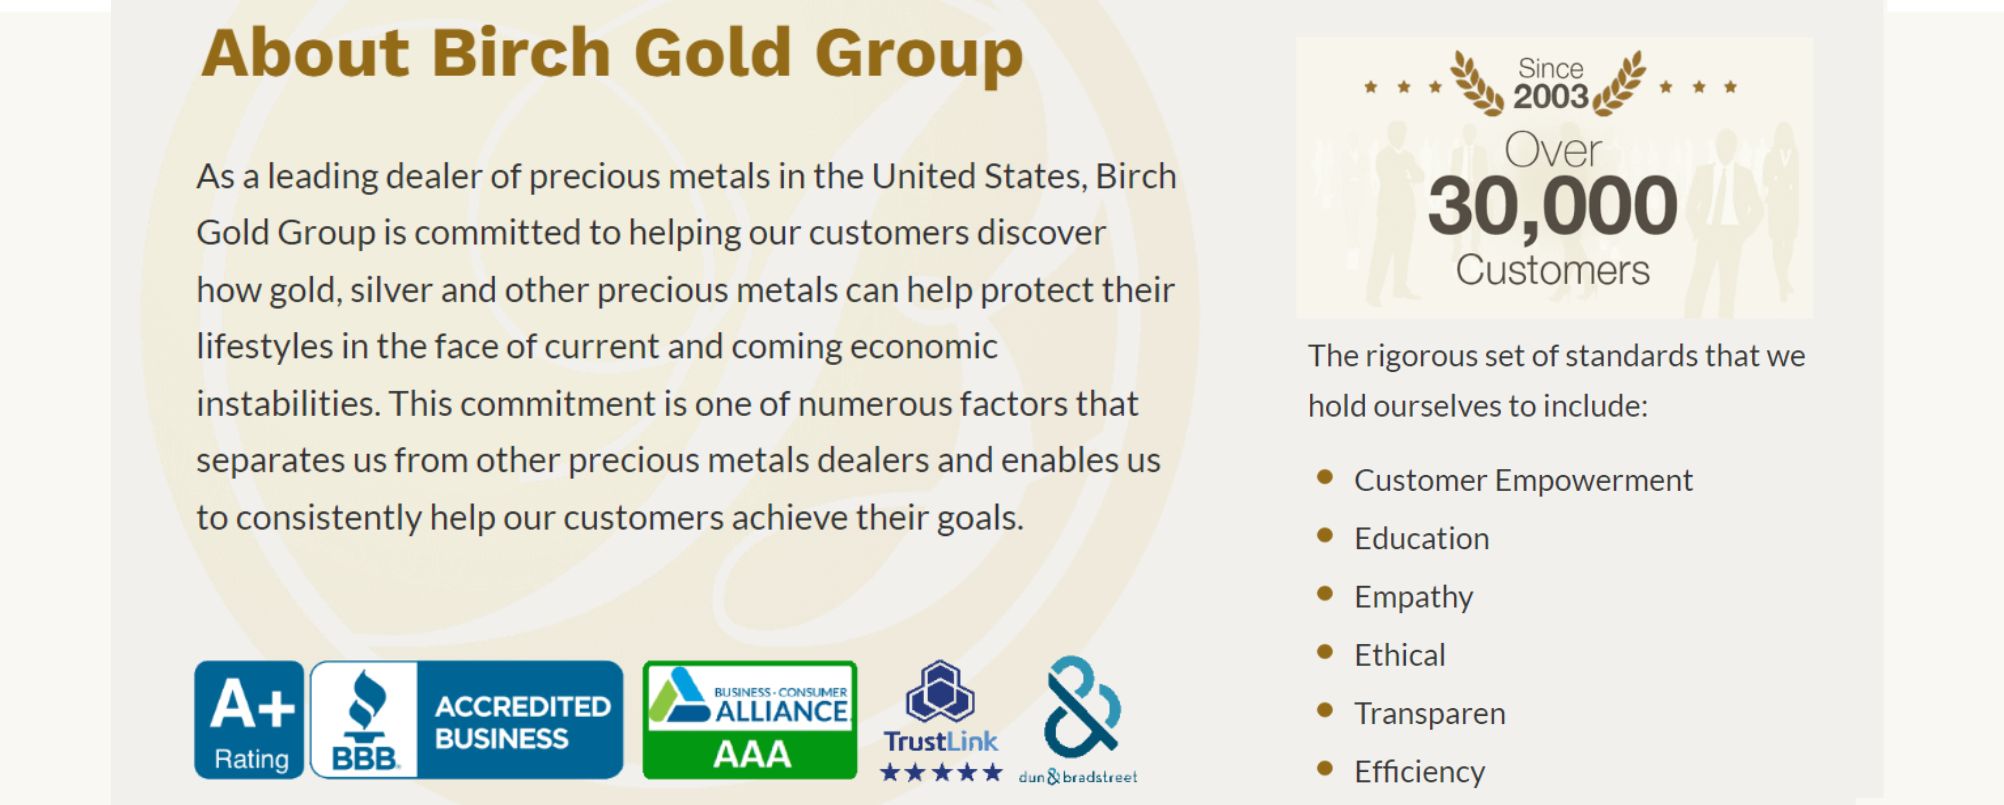 Info related to Birch Gold Group's committment to investors.